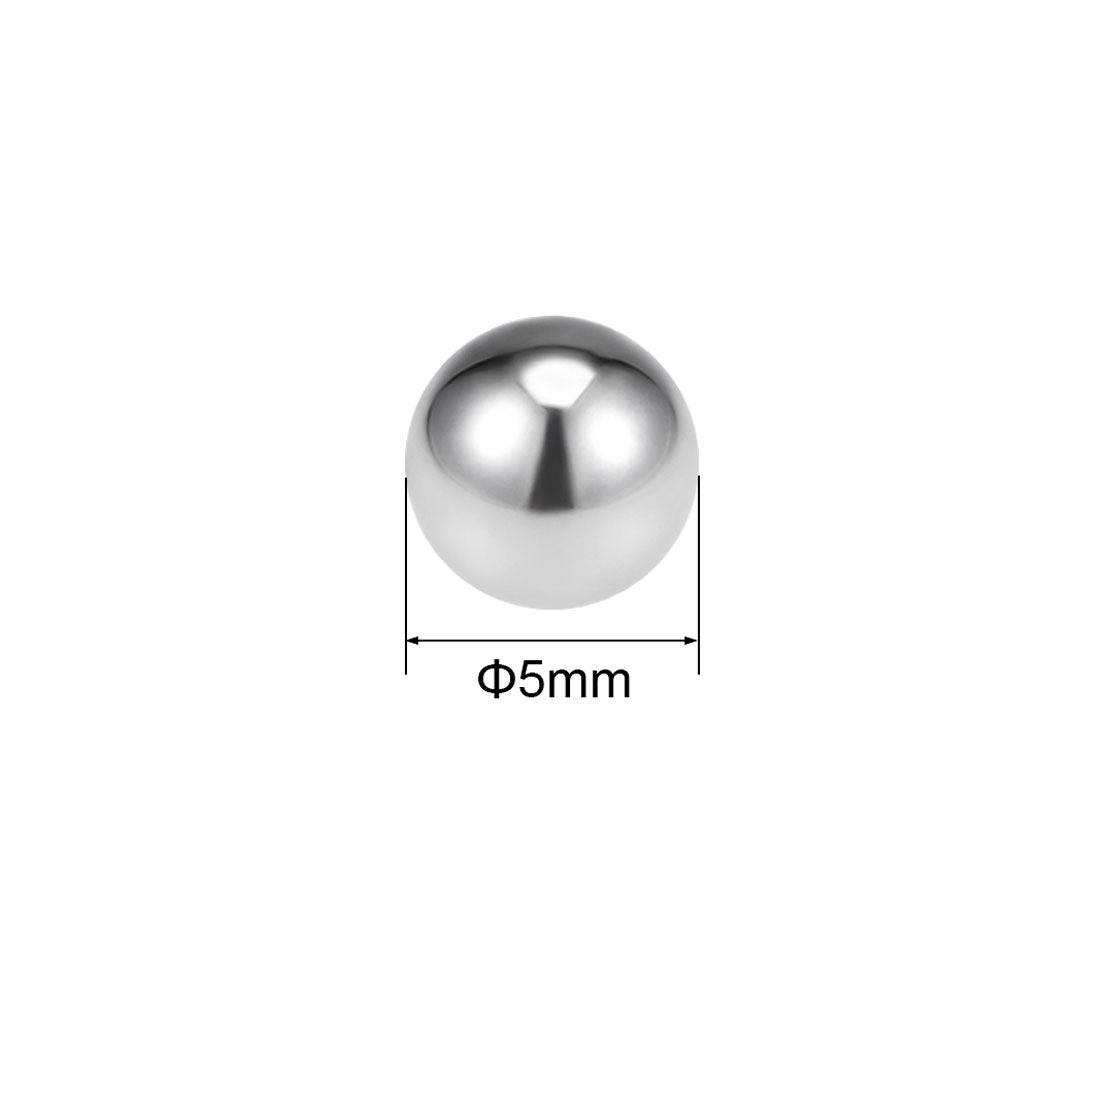 uxcell Uxcell 5mm Bearing Balls 316L Stainless Steel G100 Precision Balls 150pcs